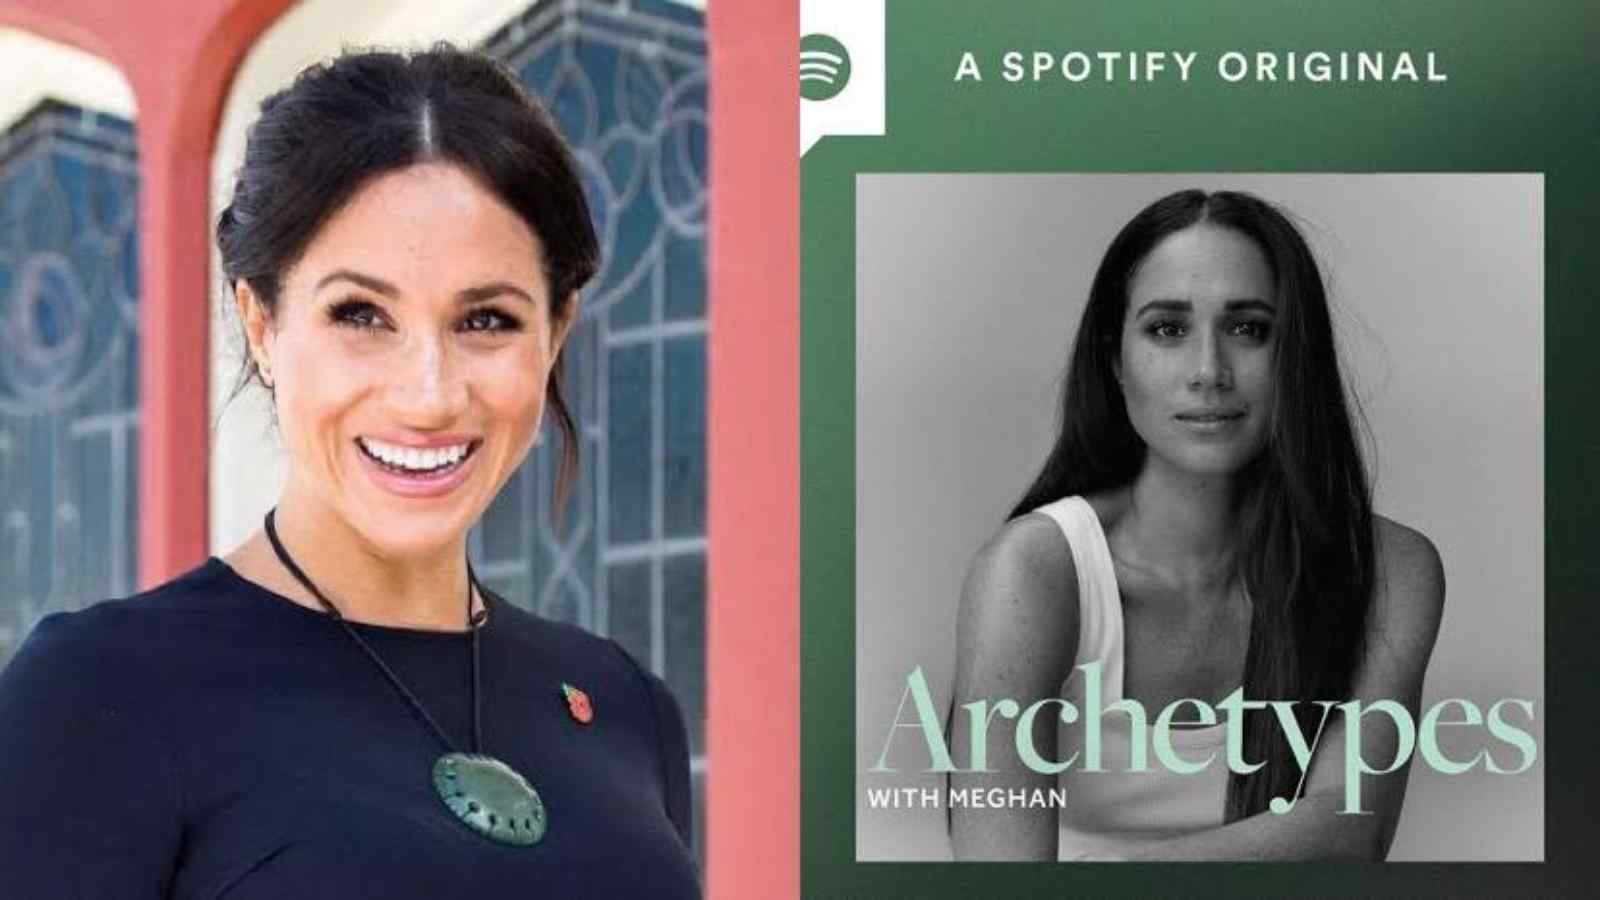 Meghan Markle's podcast show, 'Archetypes' charts no. 1 on Spotify